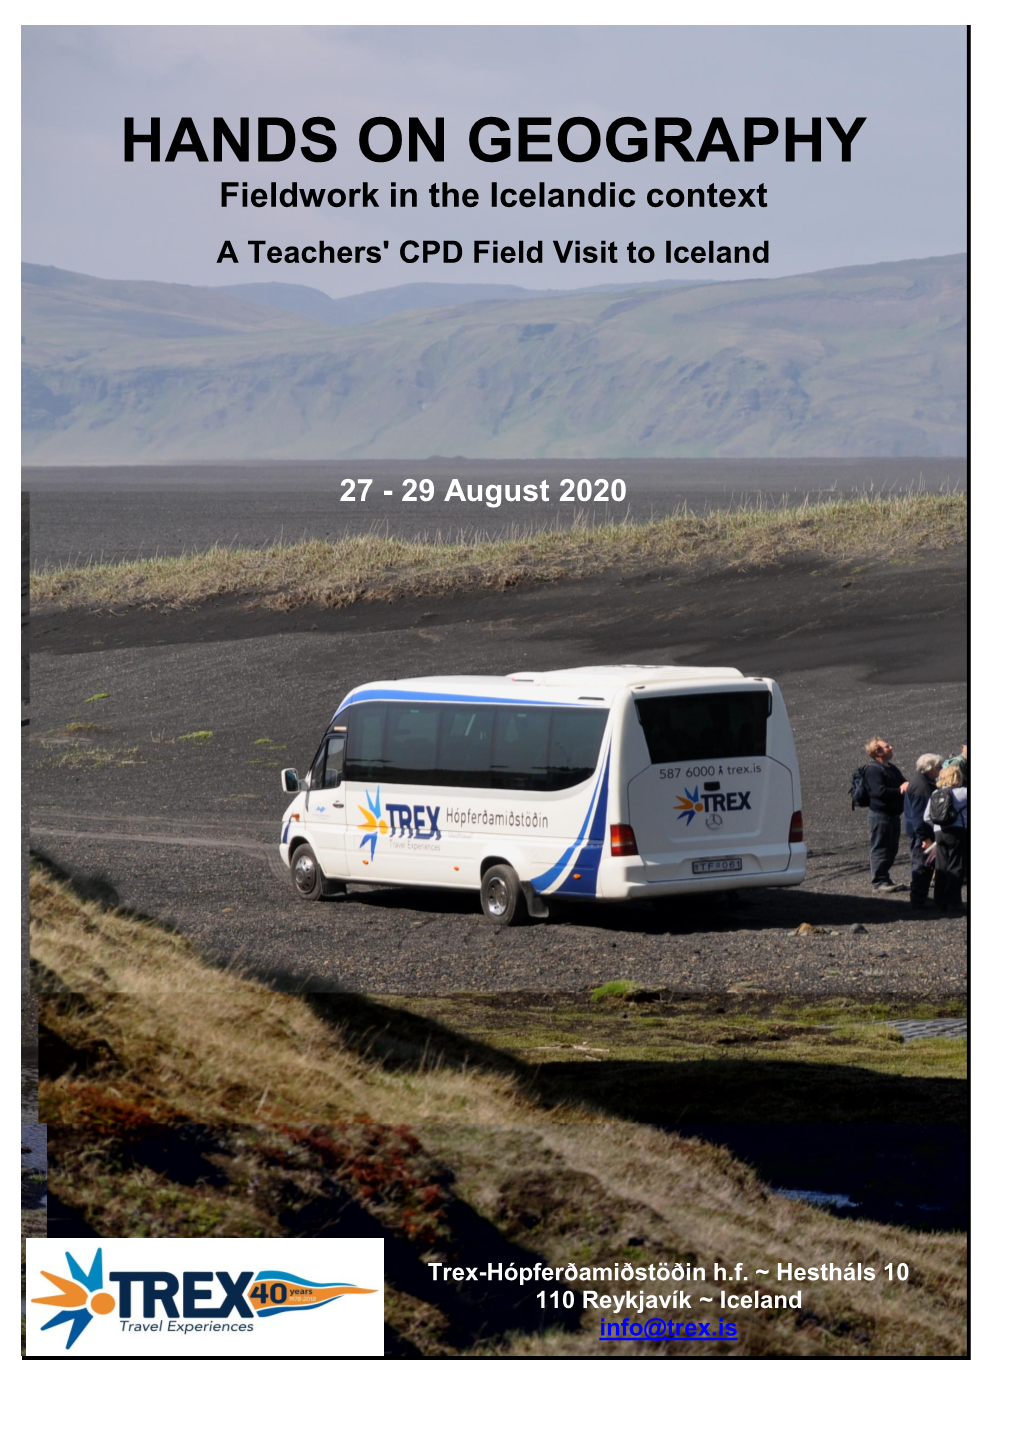 HANDS on GEOGRAPHY Fieldwork in the Icelandic Context a Teachers' CPD Field Visit to Iceland